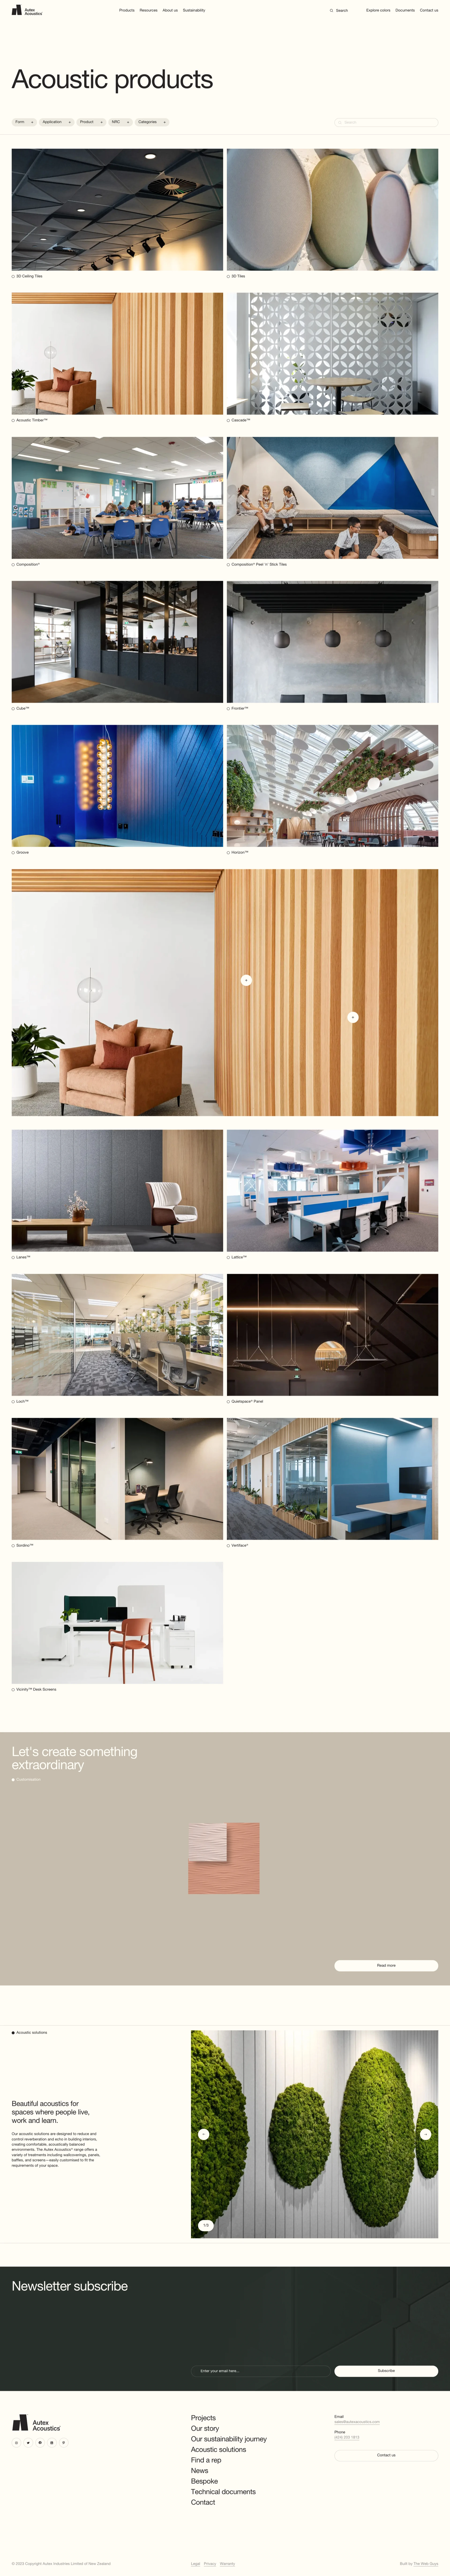 Autex Acoustics Landing Page Example: Autex Acoustics is a leading designer and supplier of innovative acoustic panels and insulation products in USA. Create beautiful yet functional spaces with our solutions.